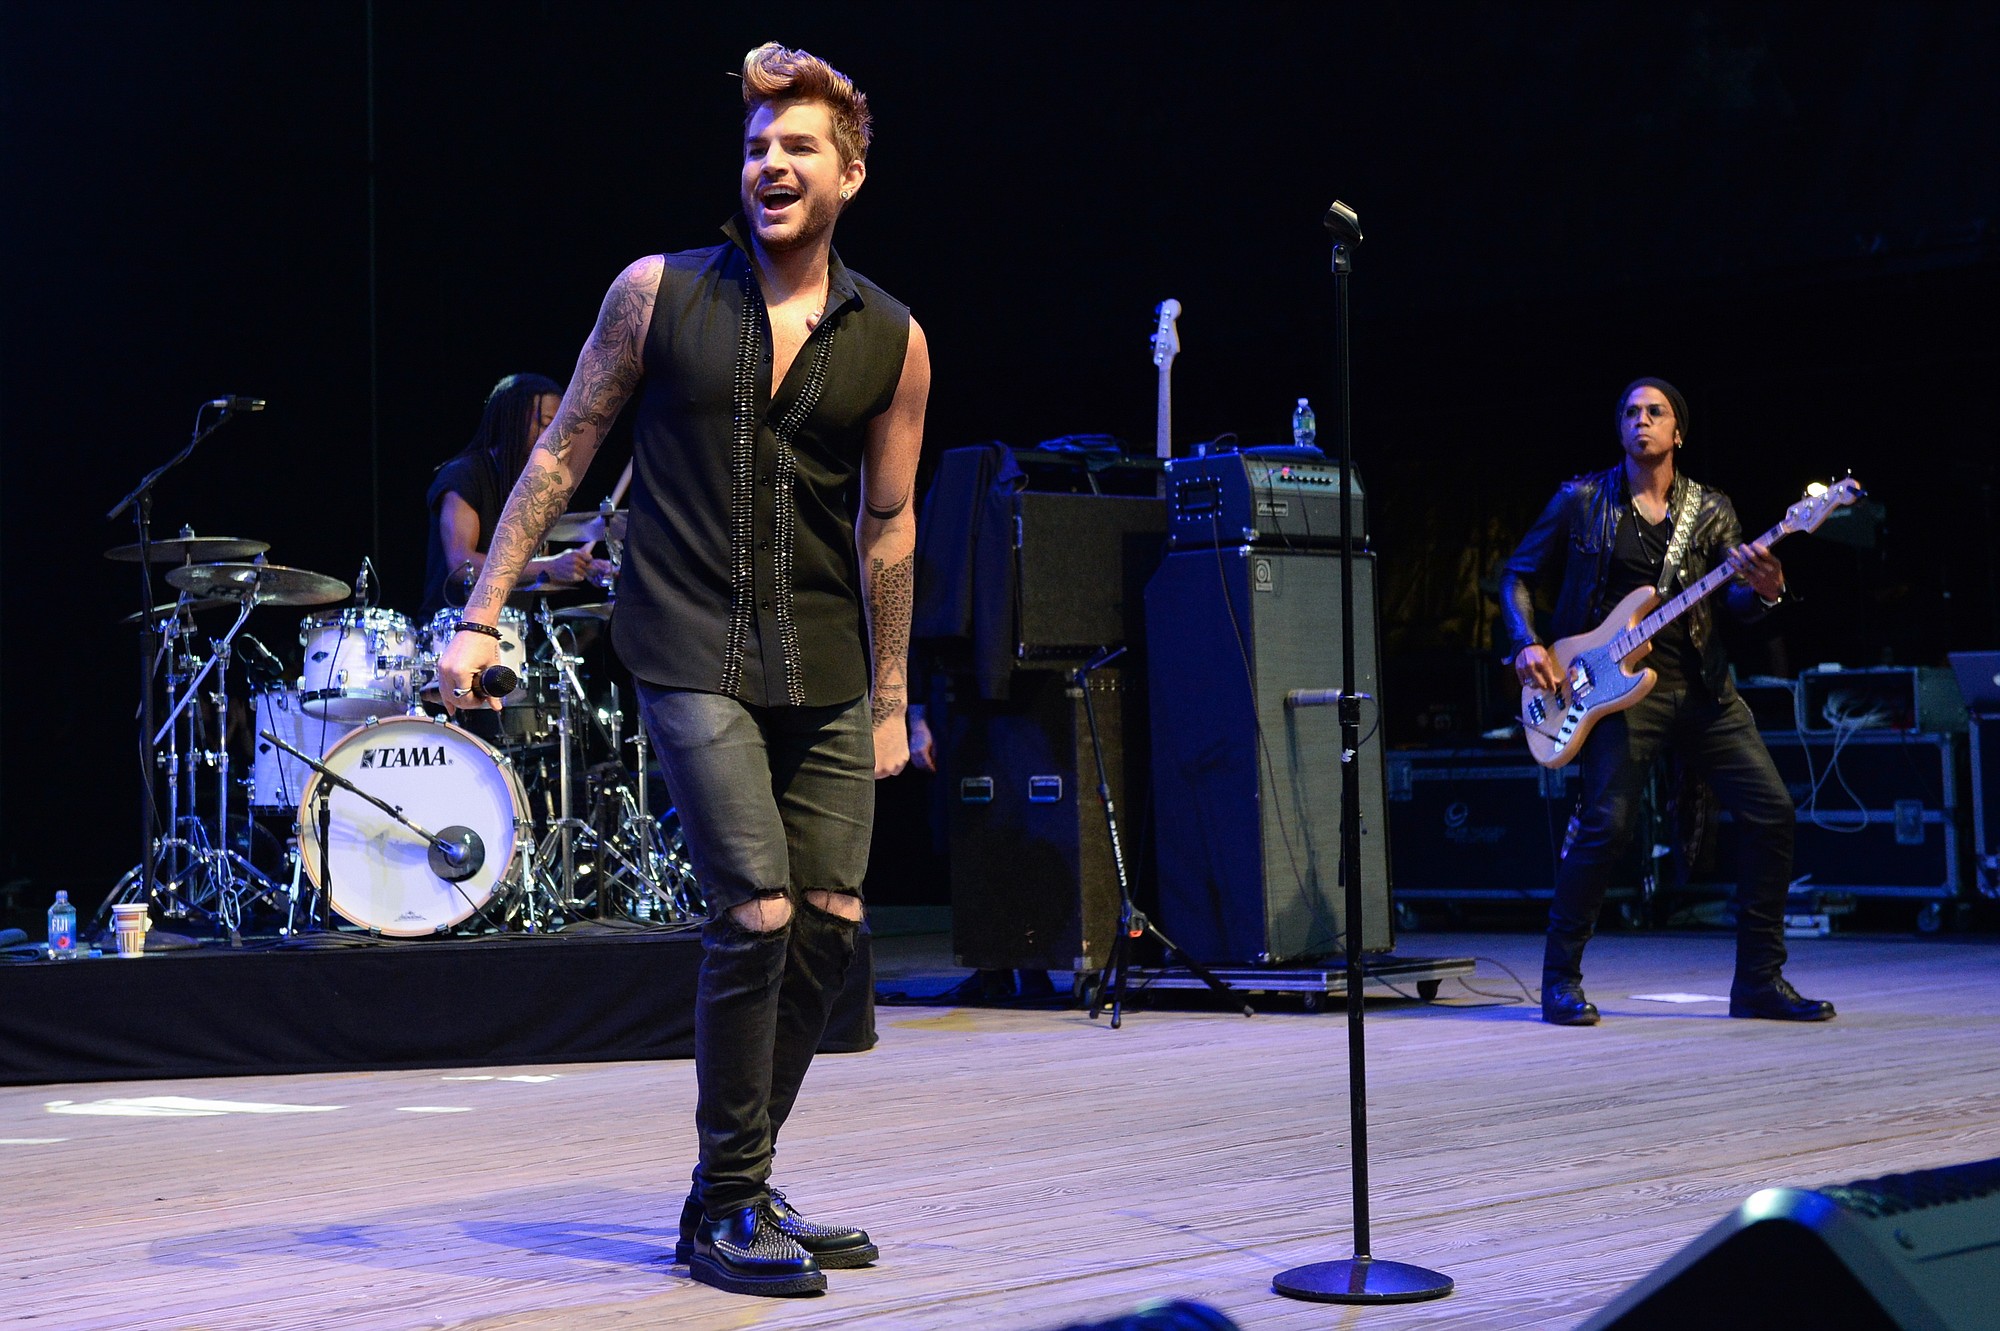 Adam Lambert performs May 31 during 103.5 KTU's KTUphoria 2015 in Wantagh, N.Y., to promote his latest album &quot;The Original High.&quot;